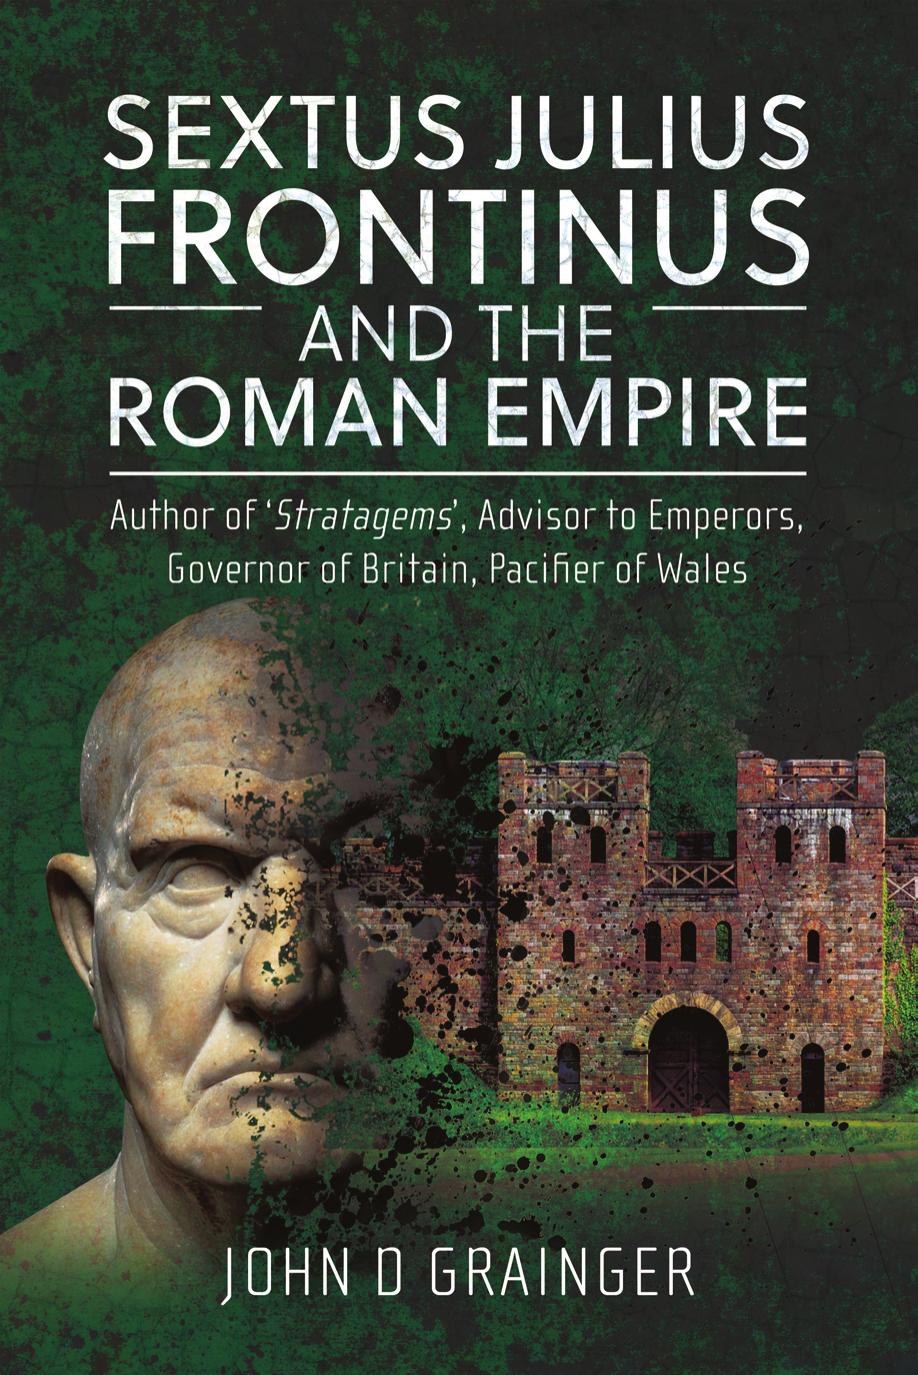 Sextus Julius Frontinus and the Roman Empire: Author of Stratagems, Advisor to Emperors, Governor of Britain, Pacifier of Wales by John D Grainger